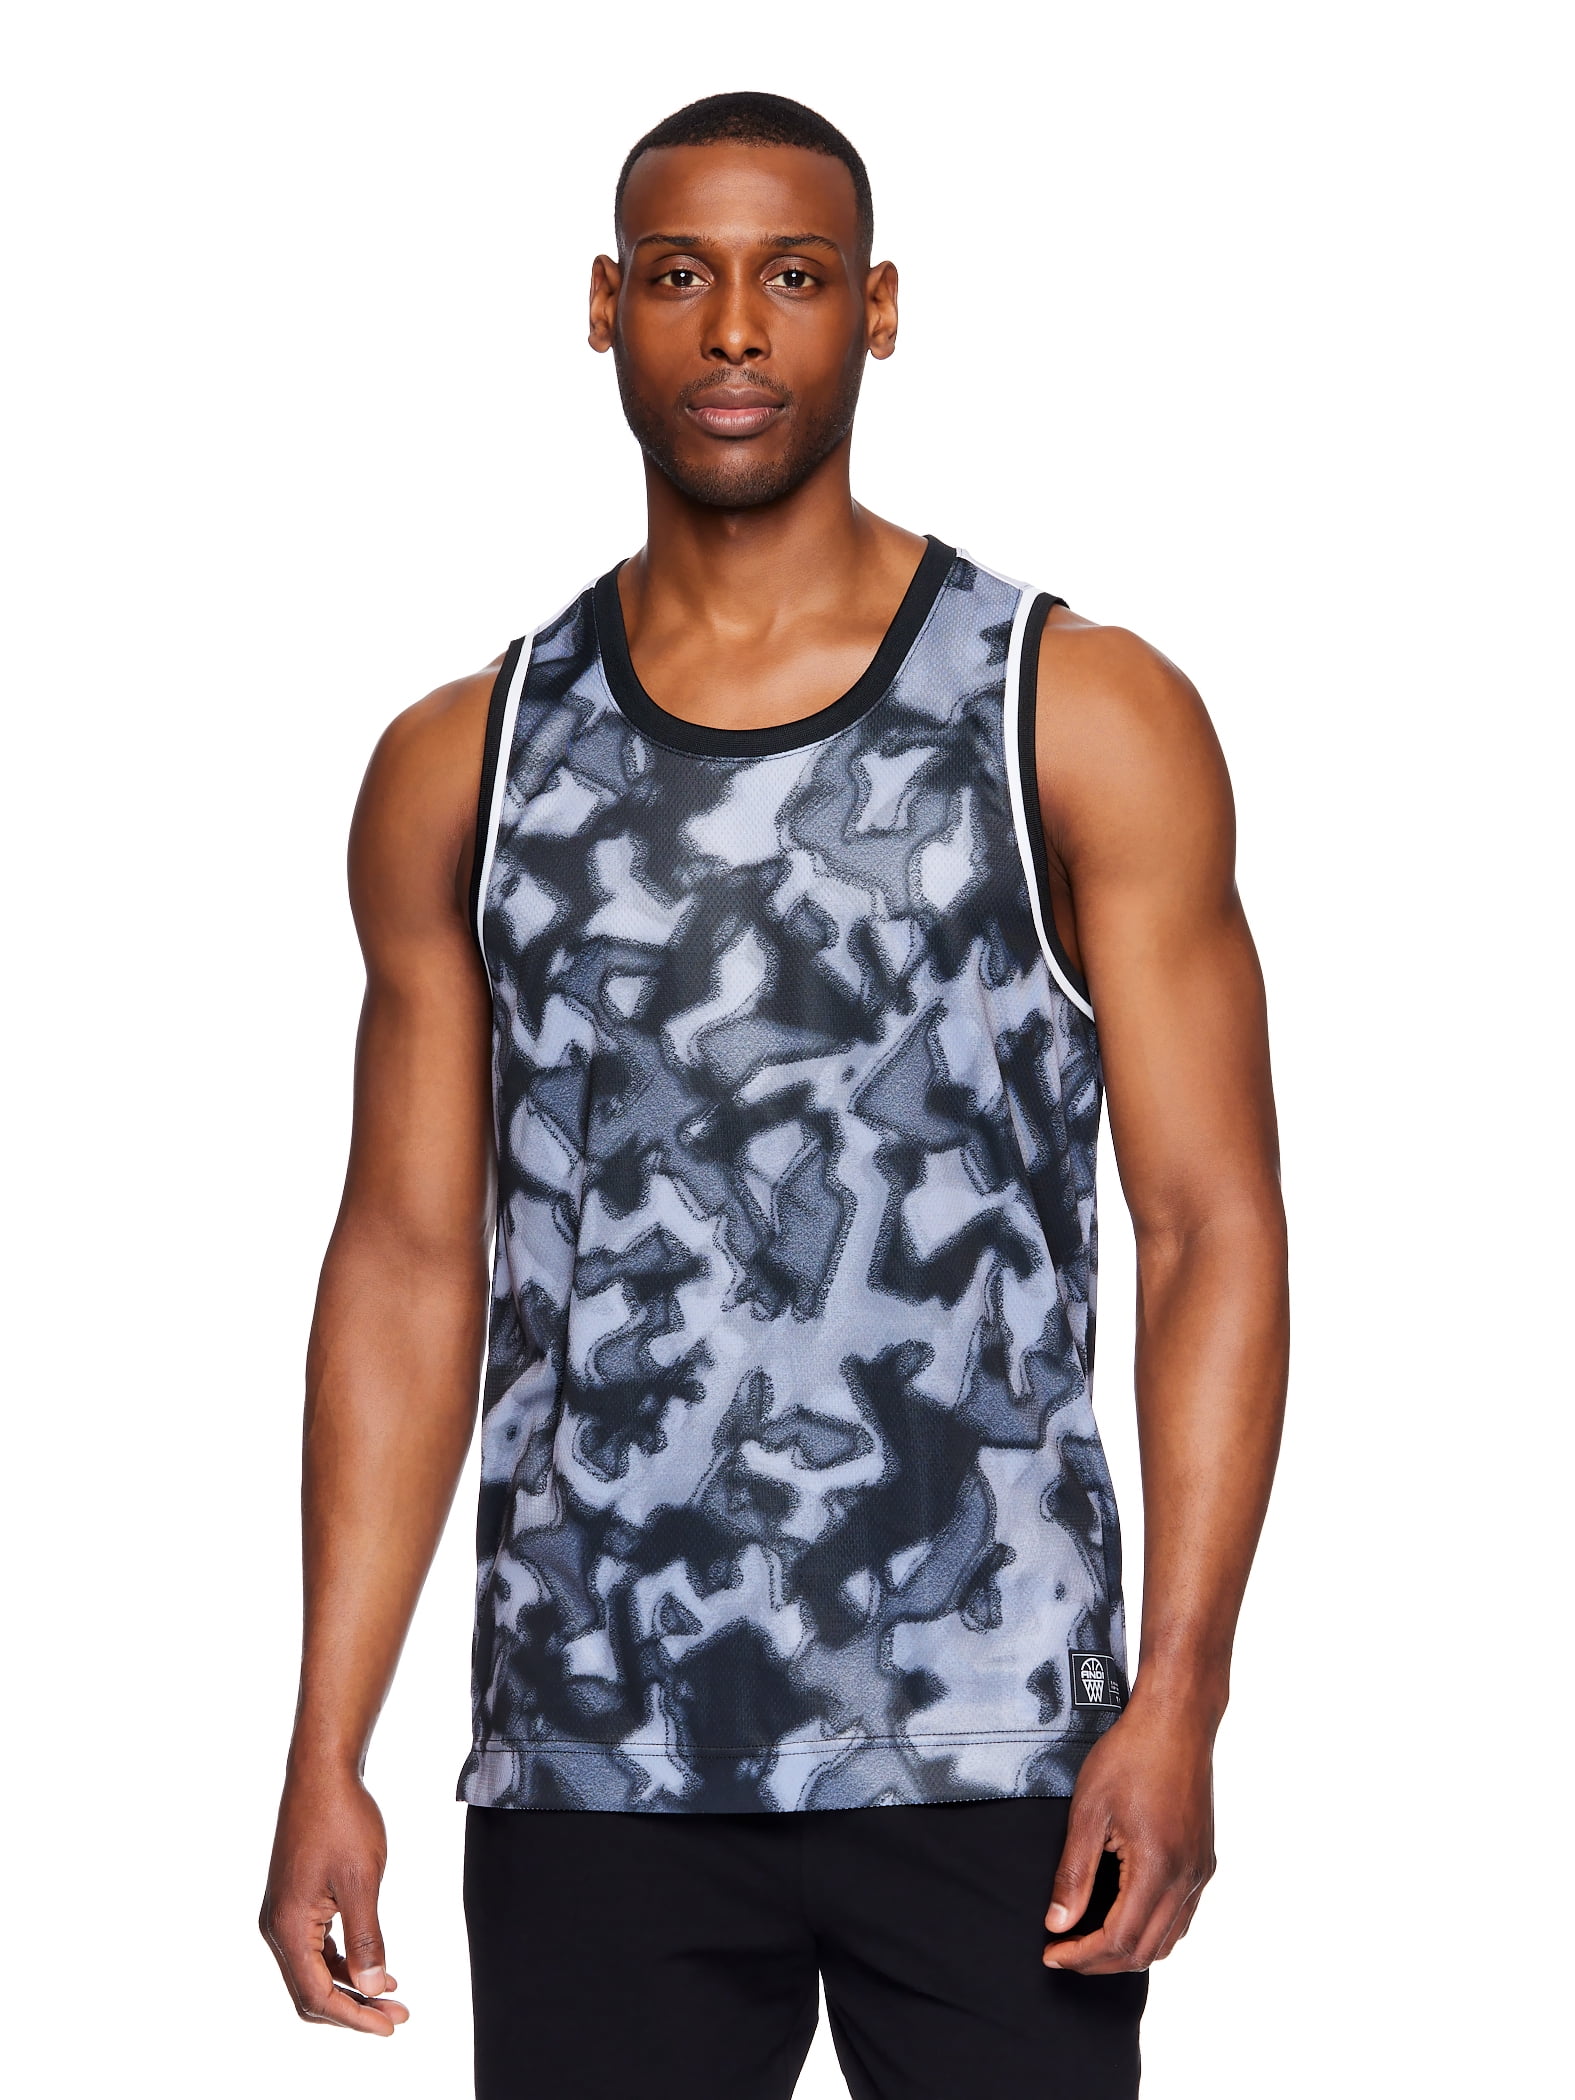 And1 Men's and Big Men's Basketball Tank Tops, up to Size 5XL - Walmart.com